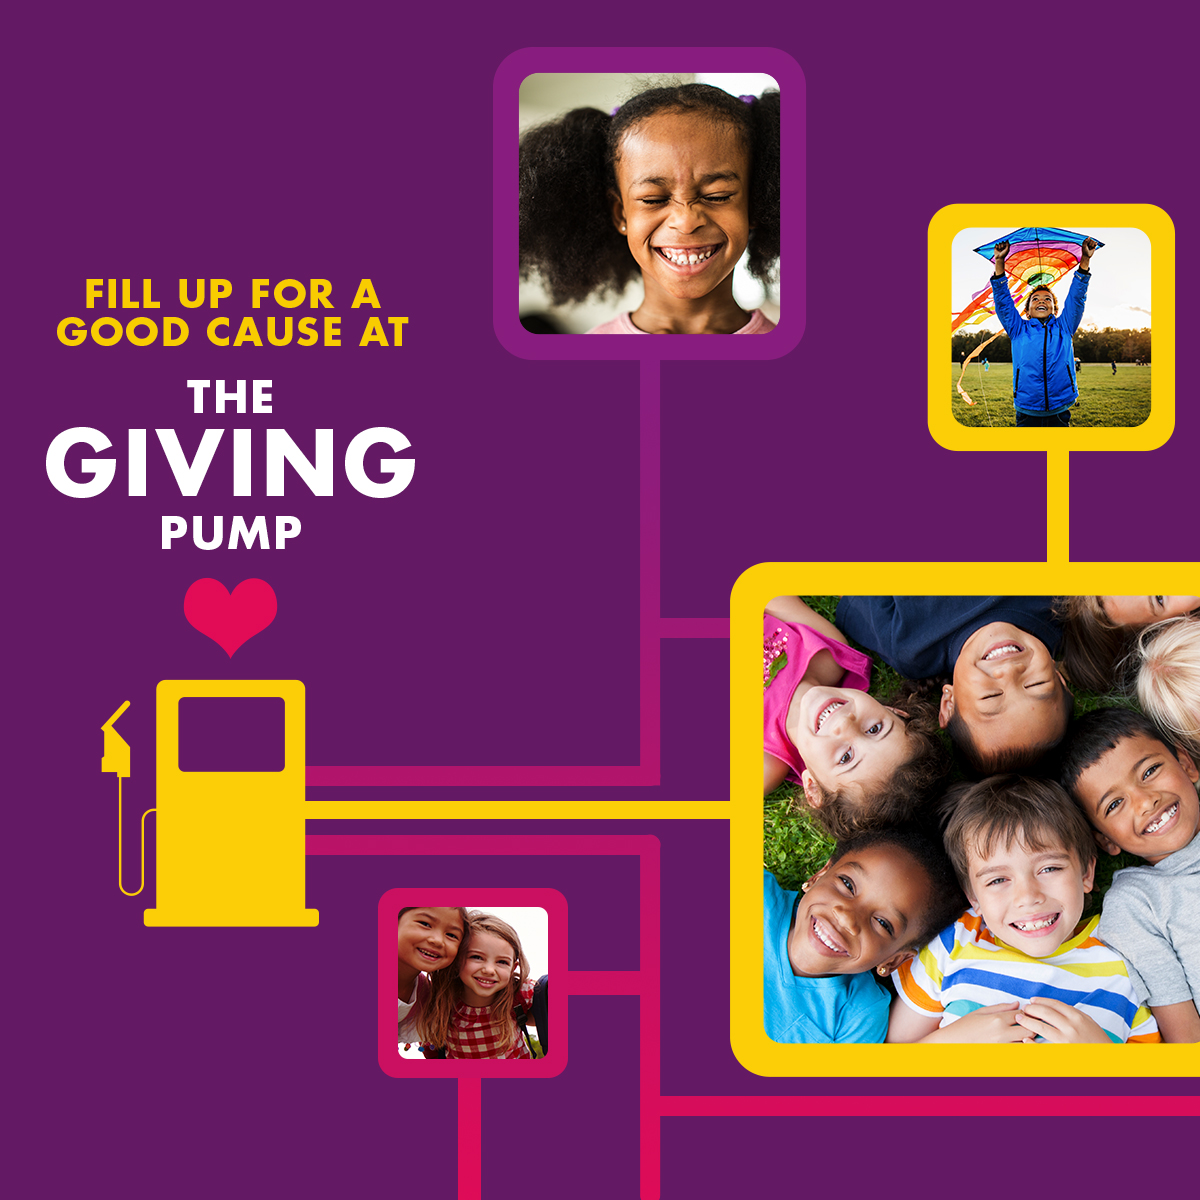 Fill up for a good cause.💜 From now until Sept. 30, a portion of every purchase made at the purple Giving Pumps at participating Shell stations will go to support children’s charities. Learn more and find a nearby site: go.shell.com/3q5MMrJ